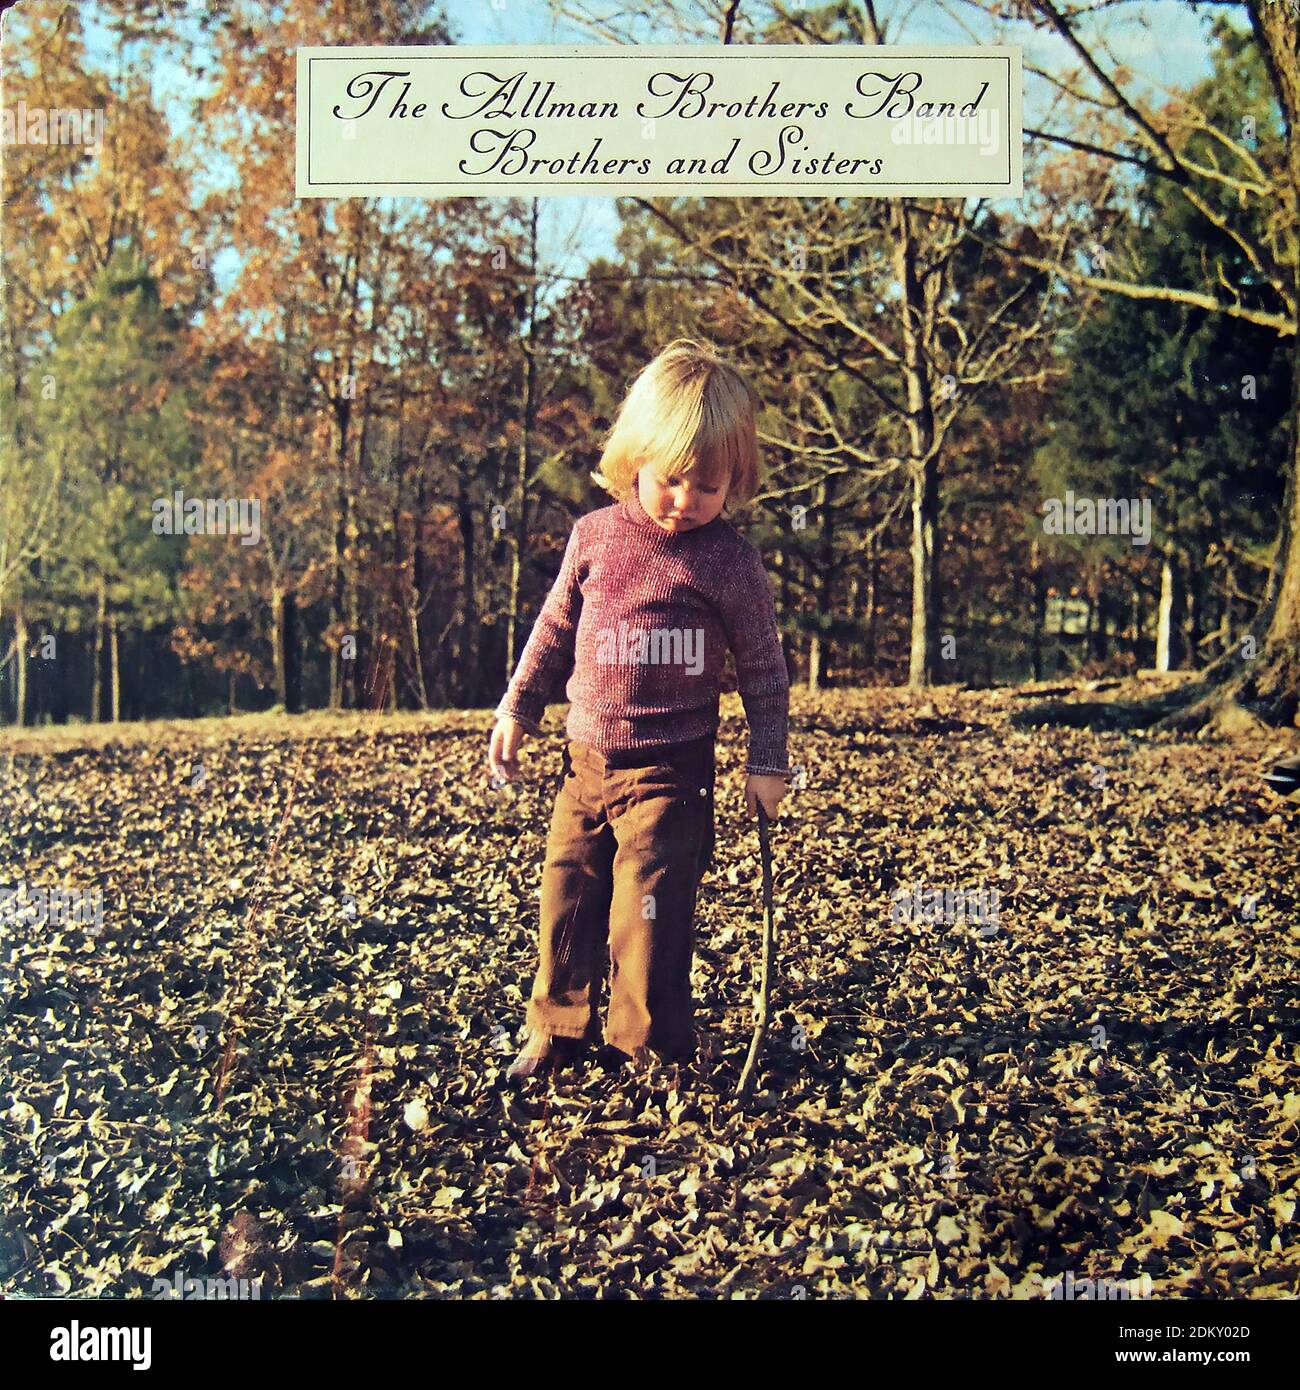 The Allman Brothers Band - Brothers & Sisters - Vintage vinyl album cover Stock Photo